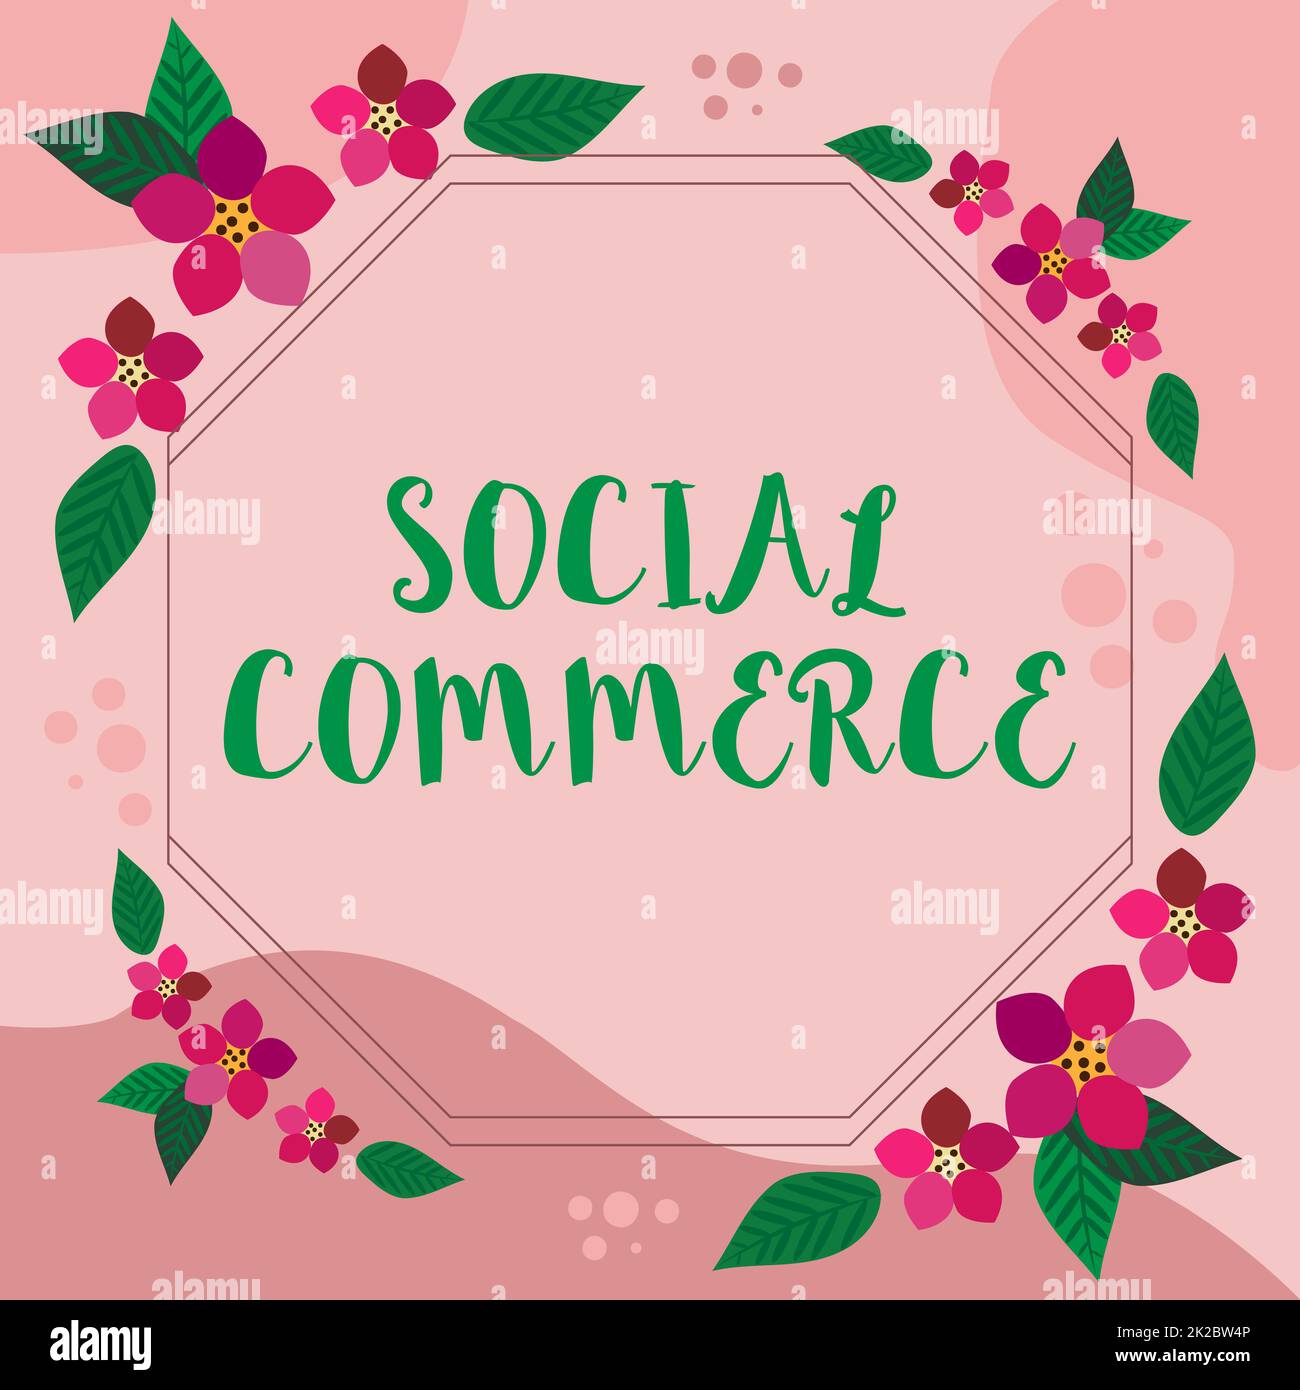 Text caption presenting Social Commerce. Business concept uses social networks in the buying of selling of products Frame Decorated With Colorful Flowers And Foliage Arranged Harmoniously. Stock Photo